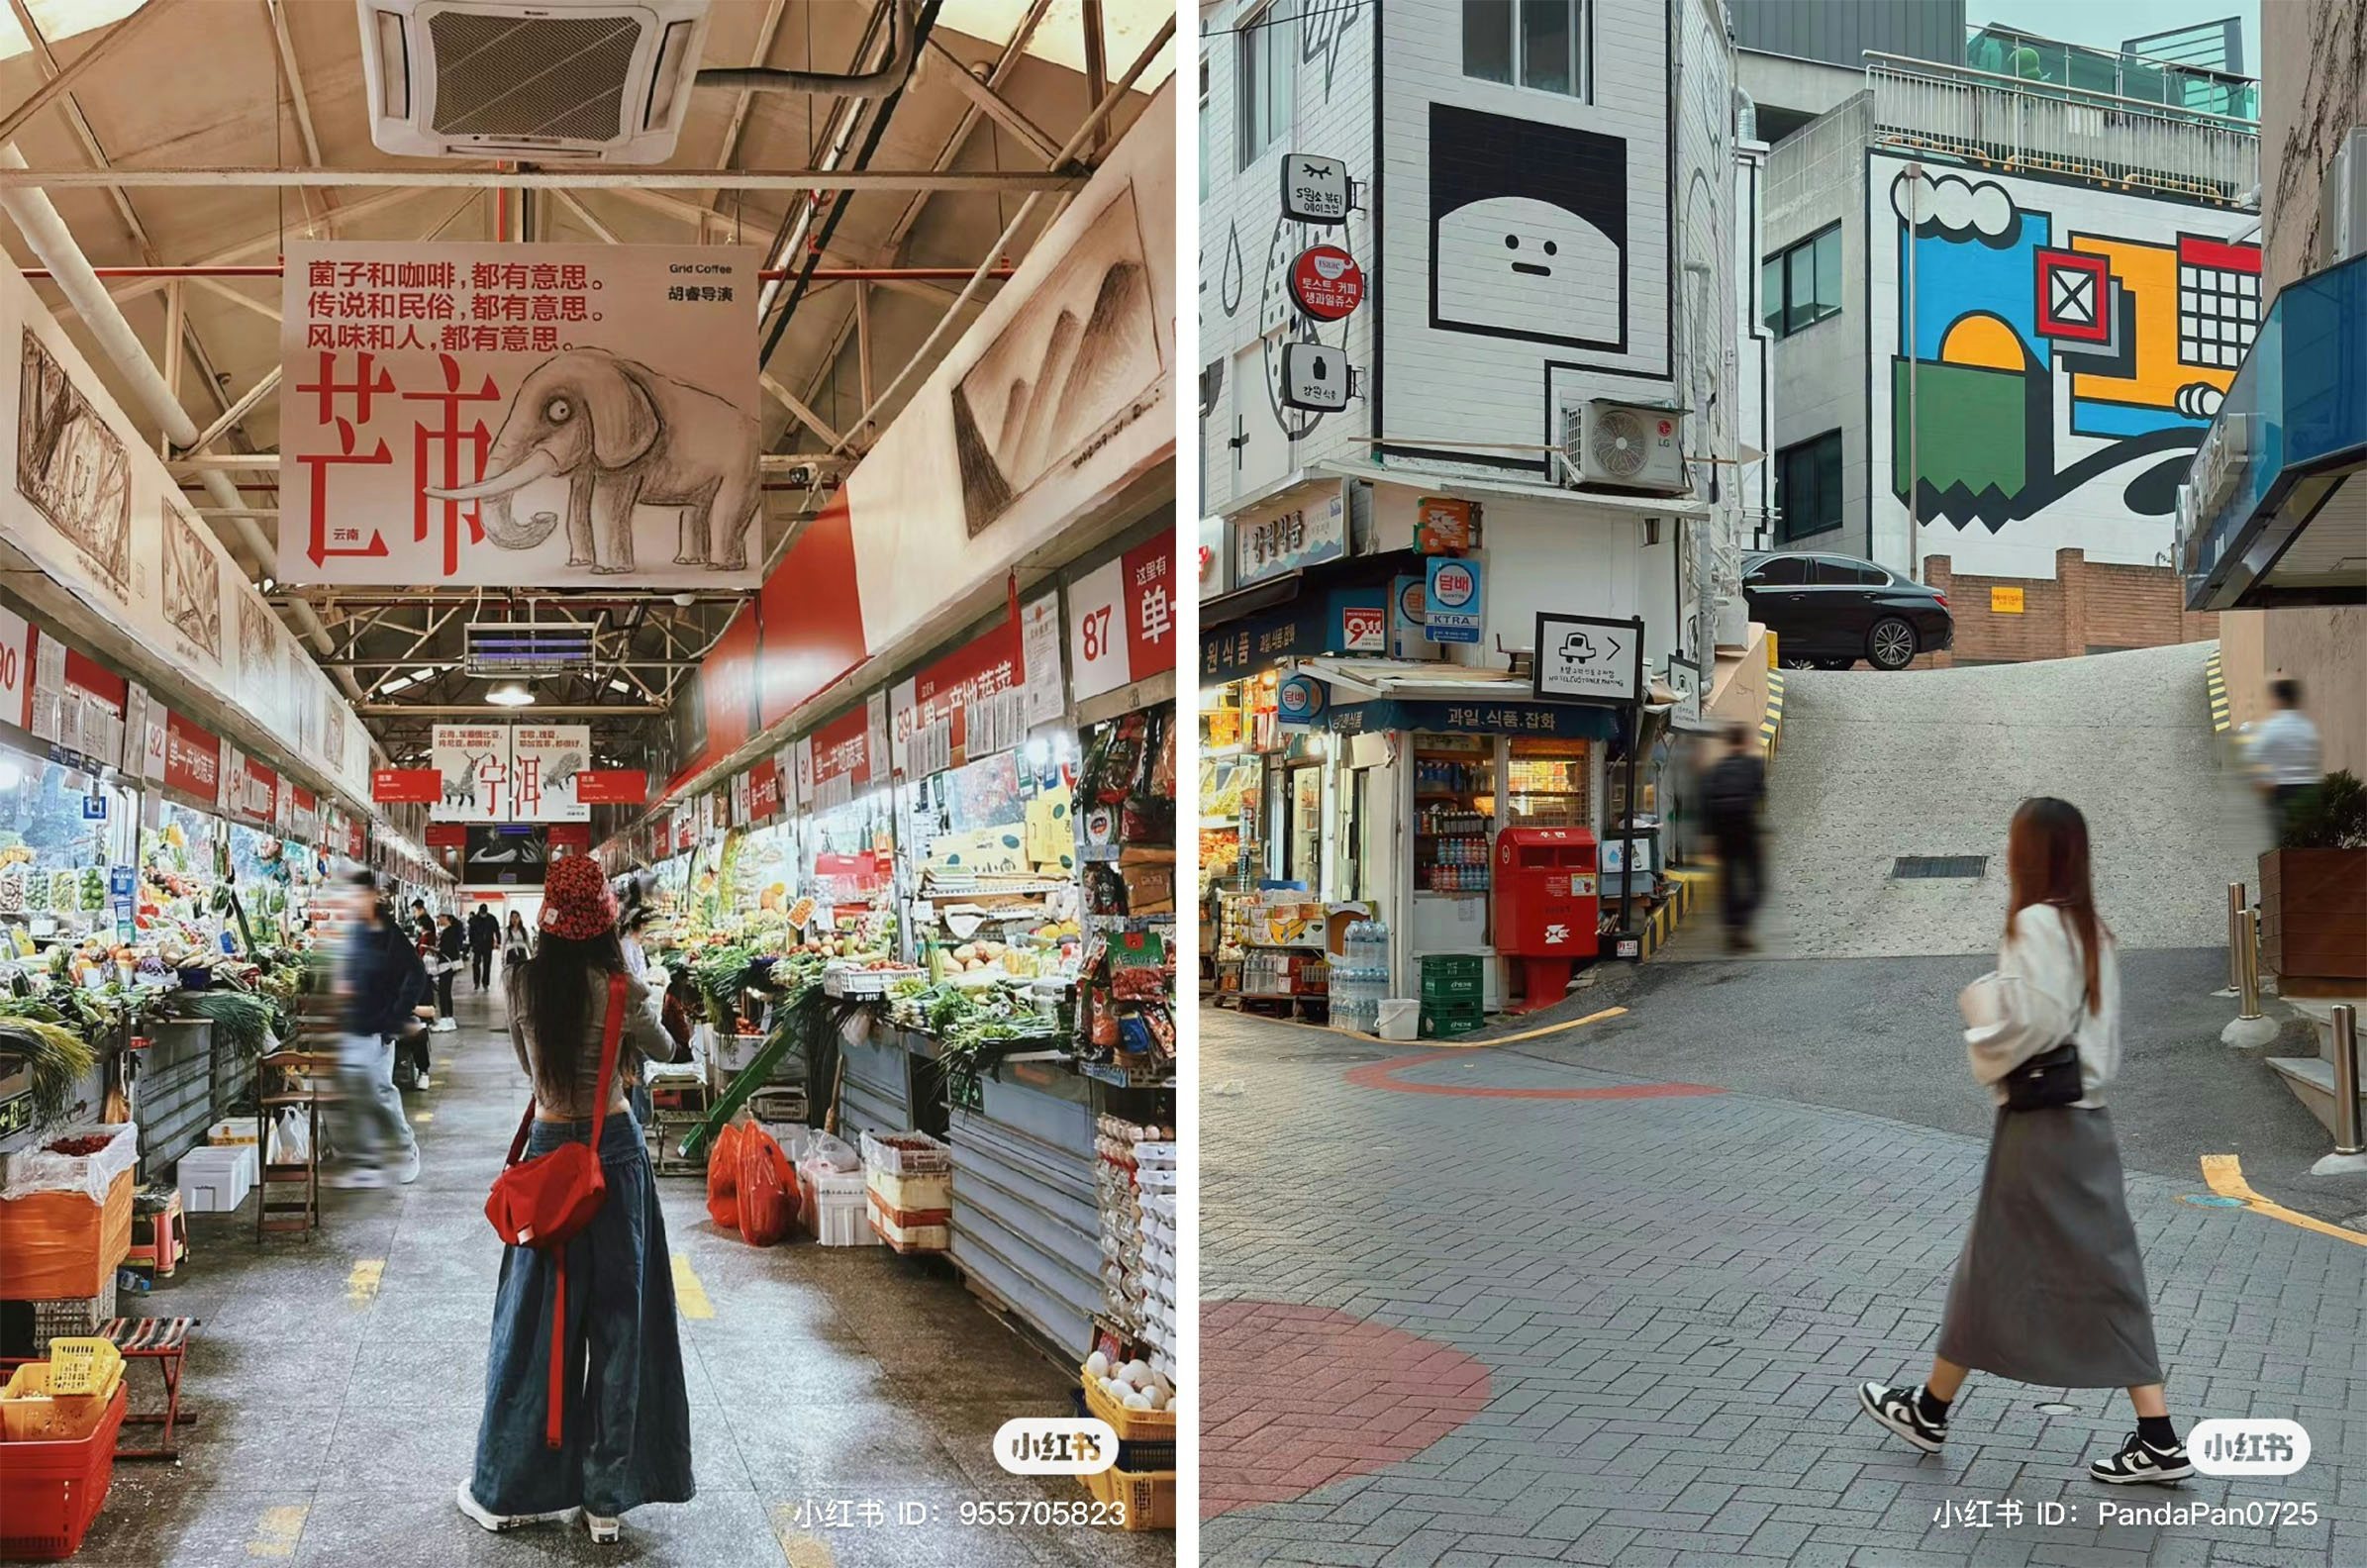 City walks and trips to the wet market have become popular activities among China's Gen Z. Photo: Xiaohongshu